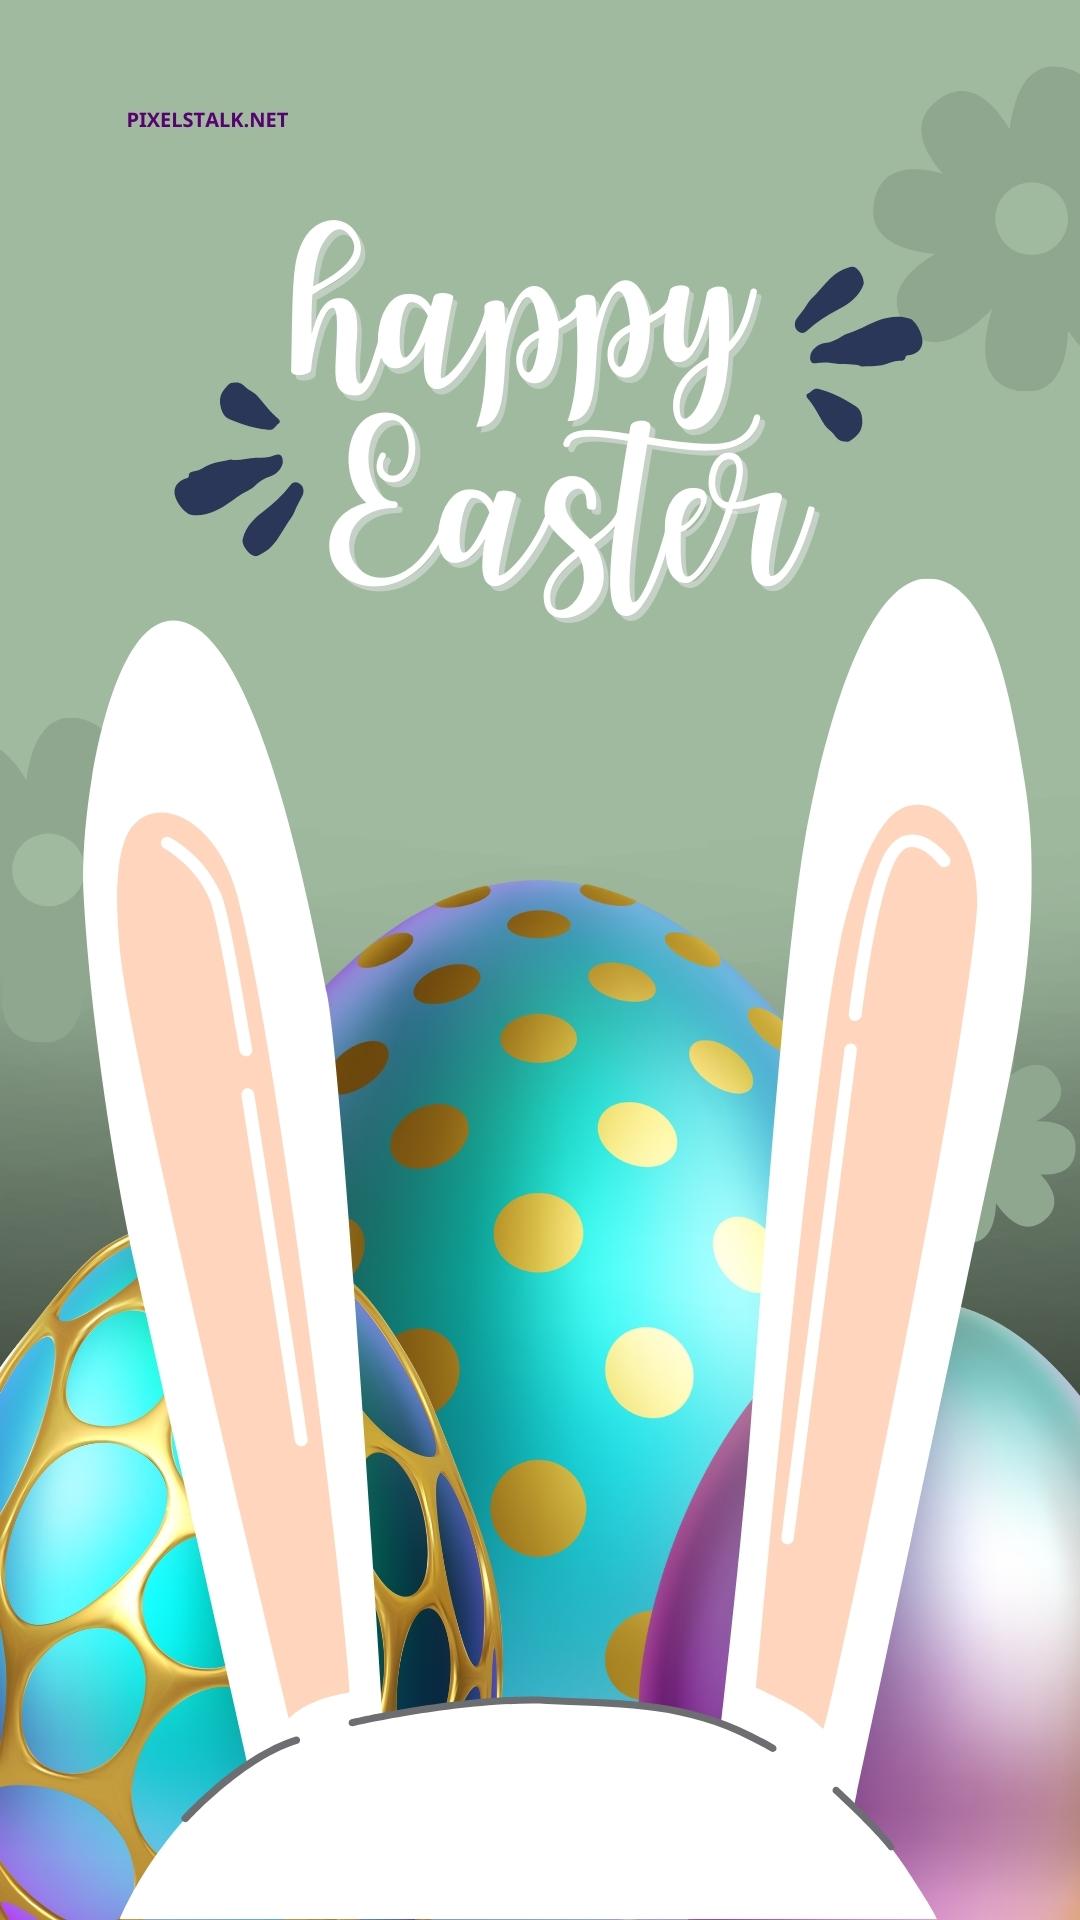 40 Springy Easter Wallpapers for iPhone Aesthetic  Free  The Mood Guide